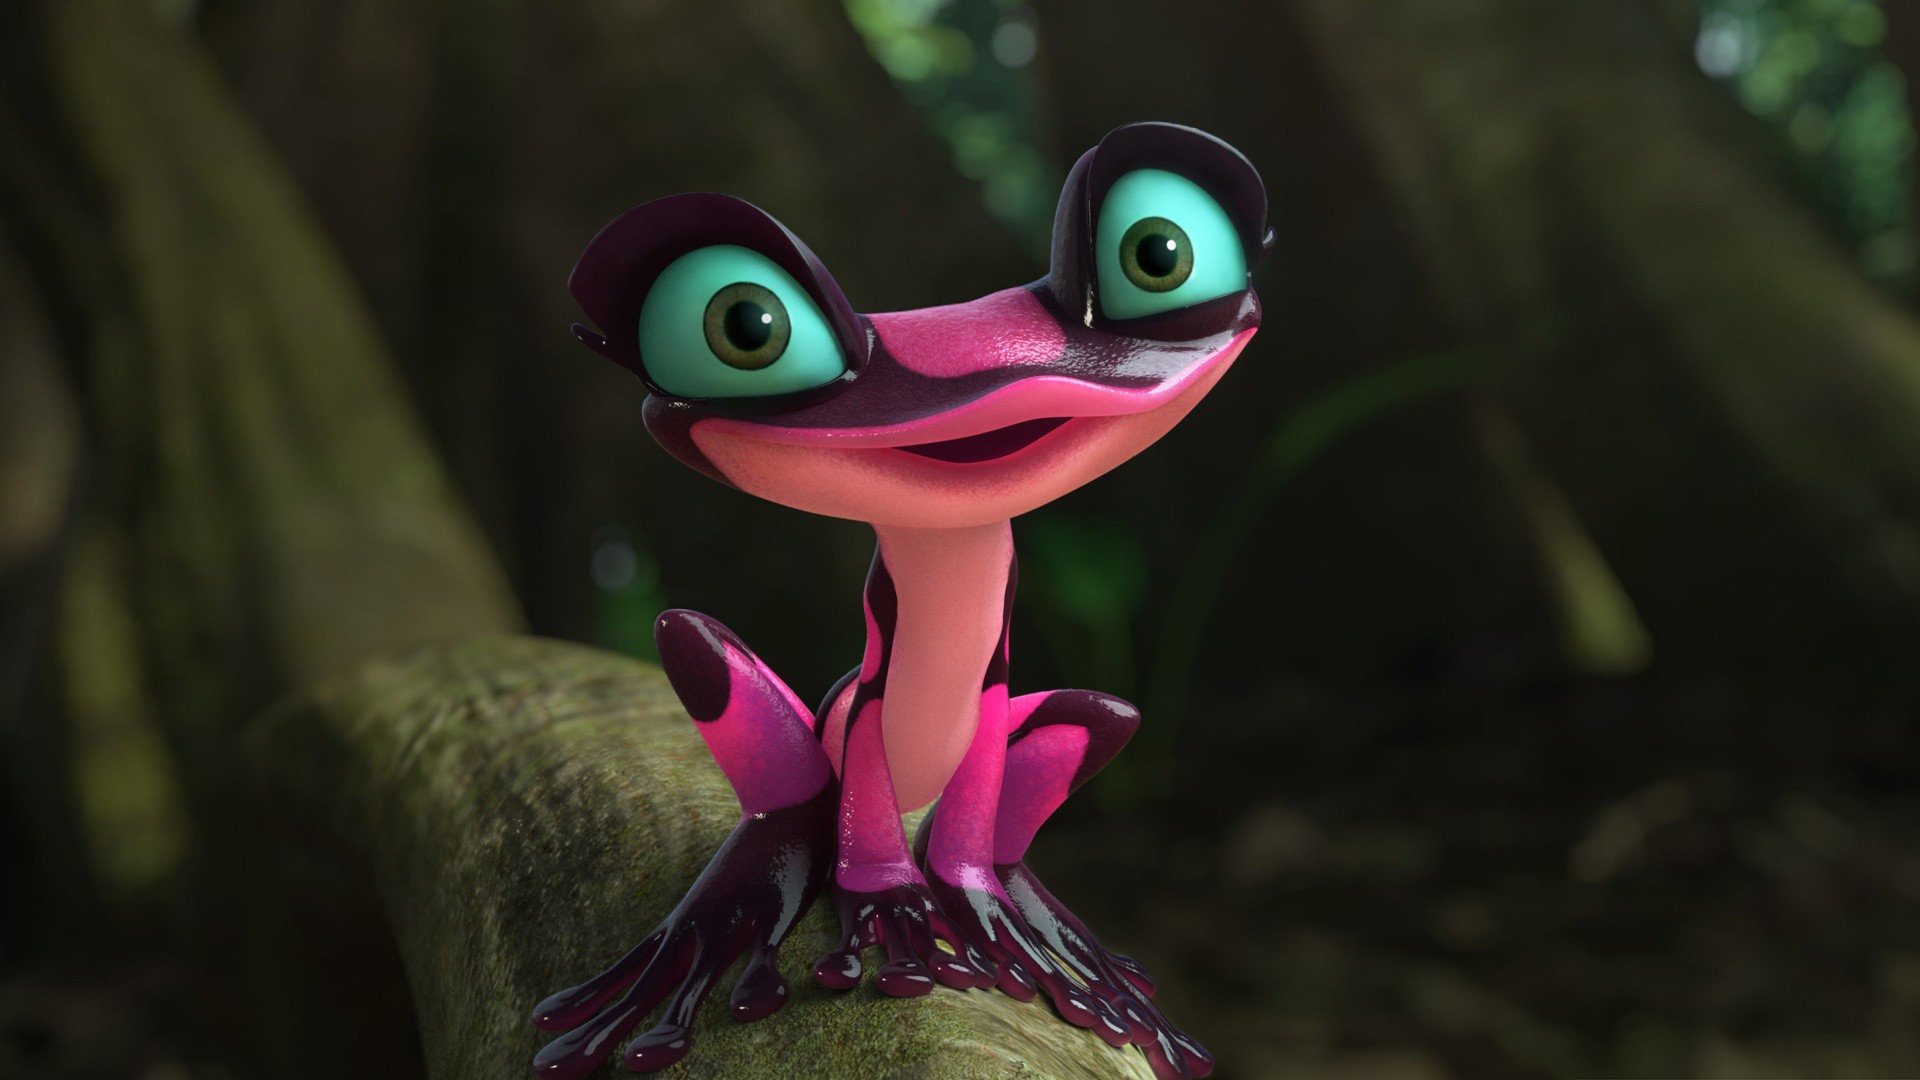 Cute Frog Cartoon Wallpaper And Image Pictures Photos